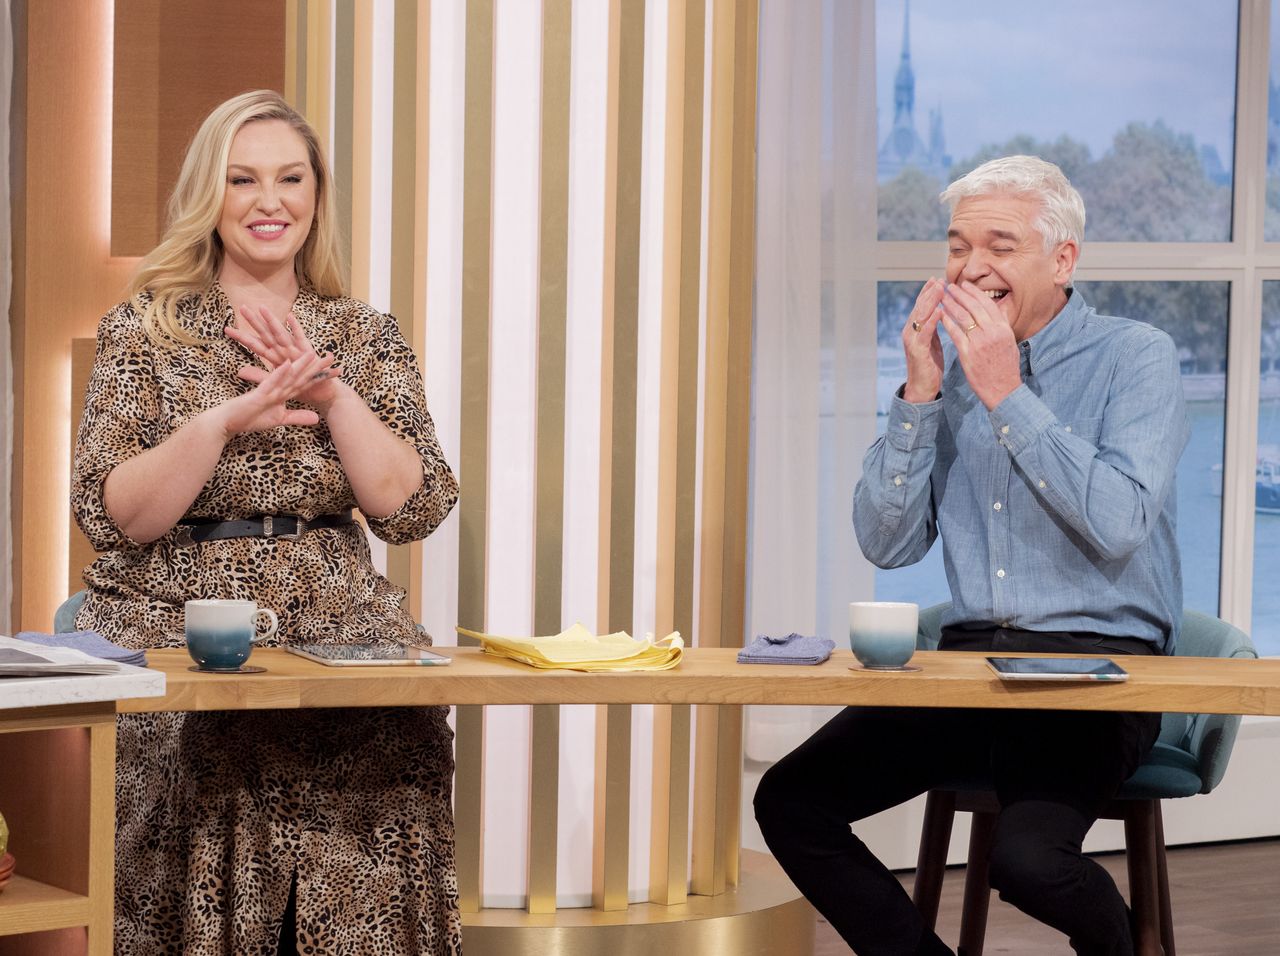 Josie hosting This Morning with Phillip Schofield